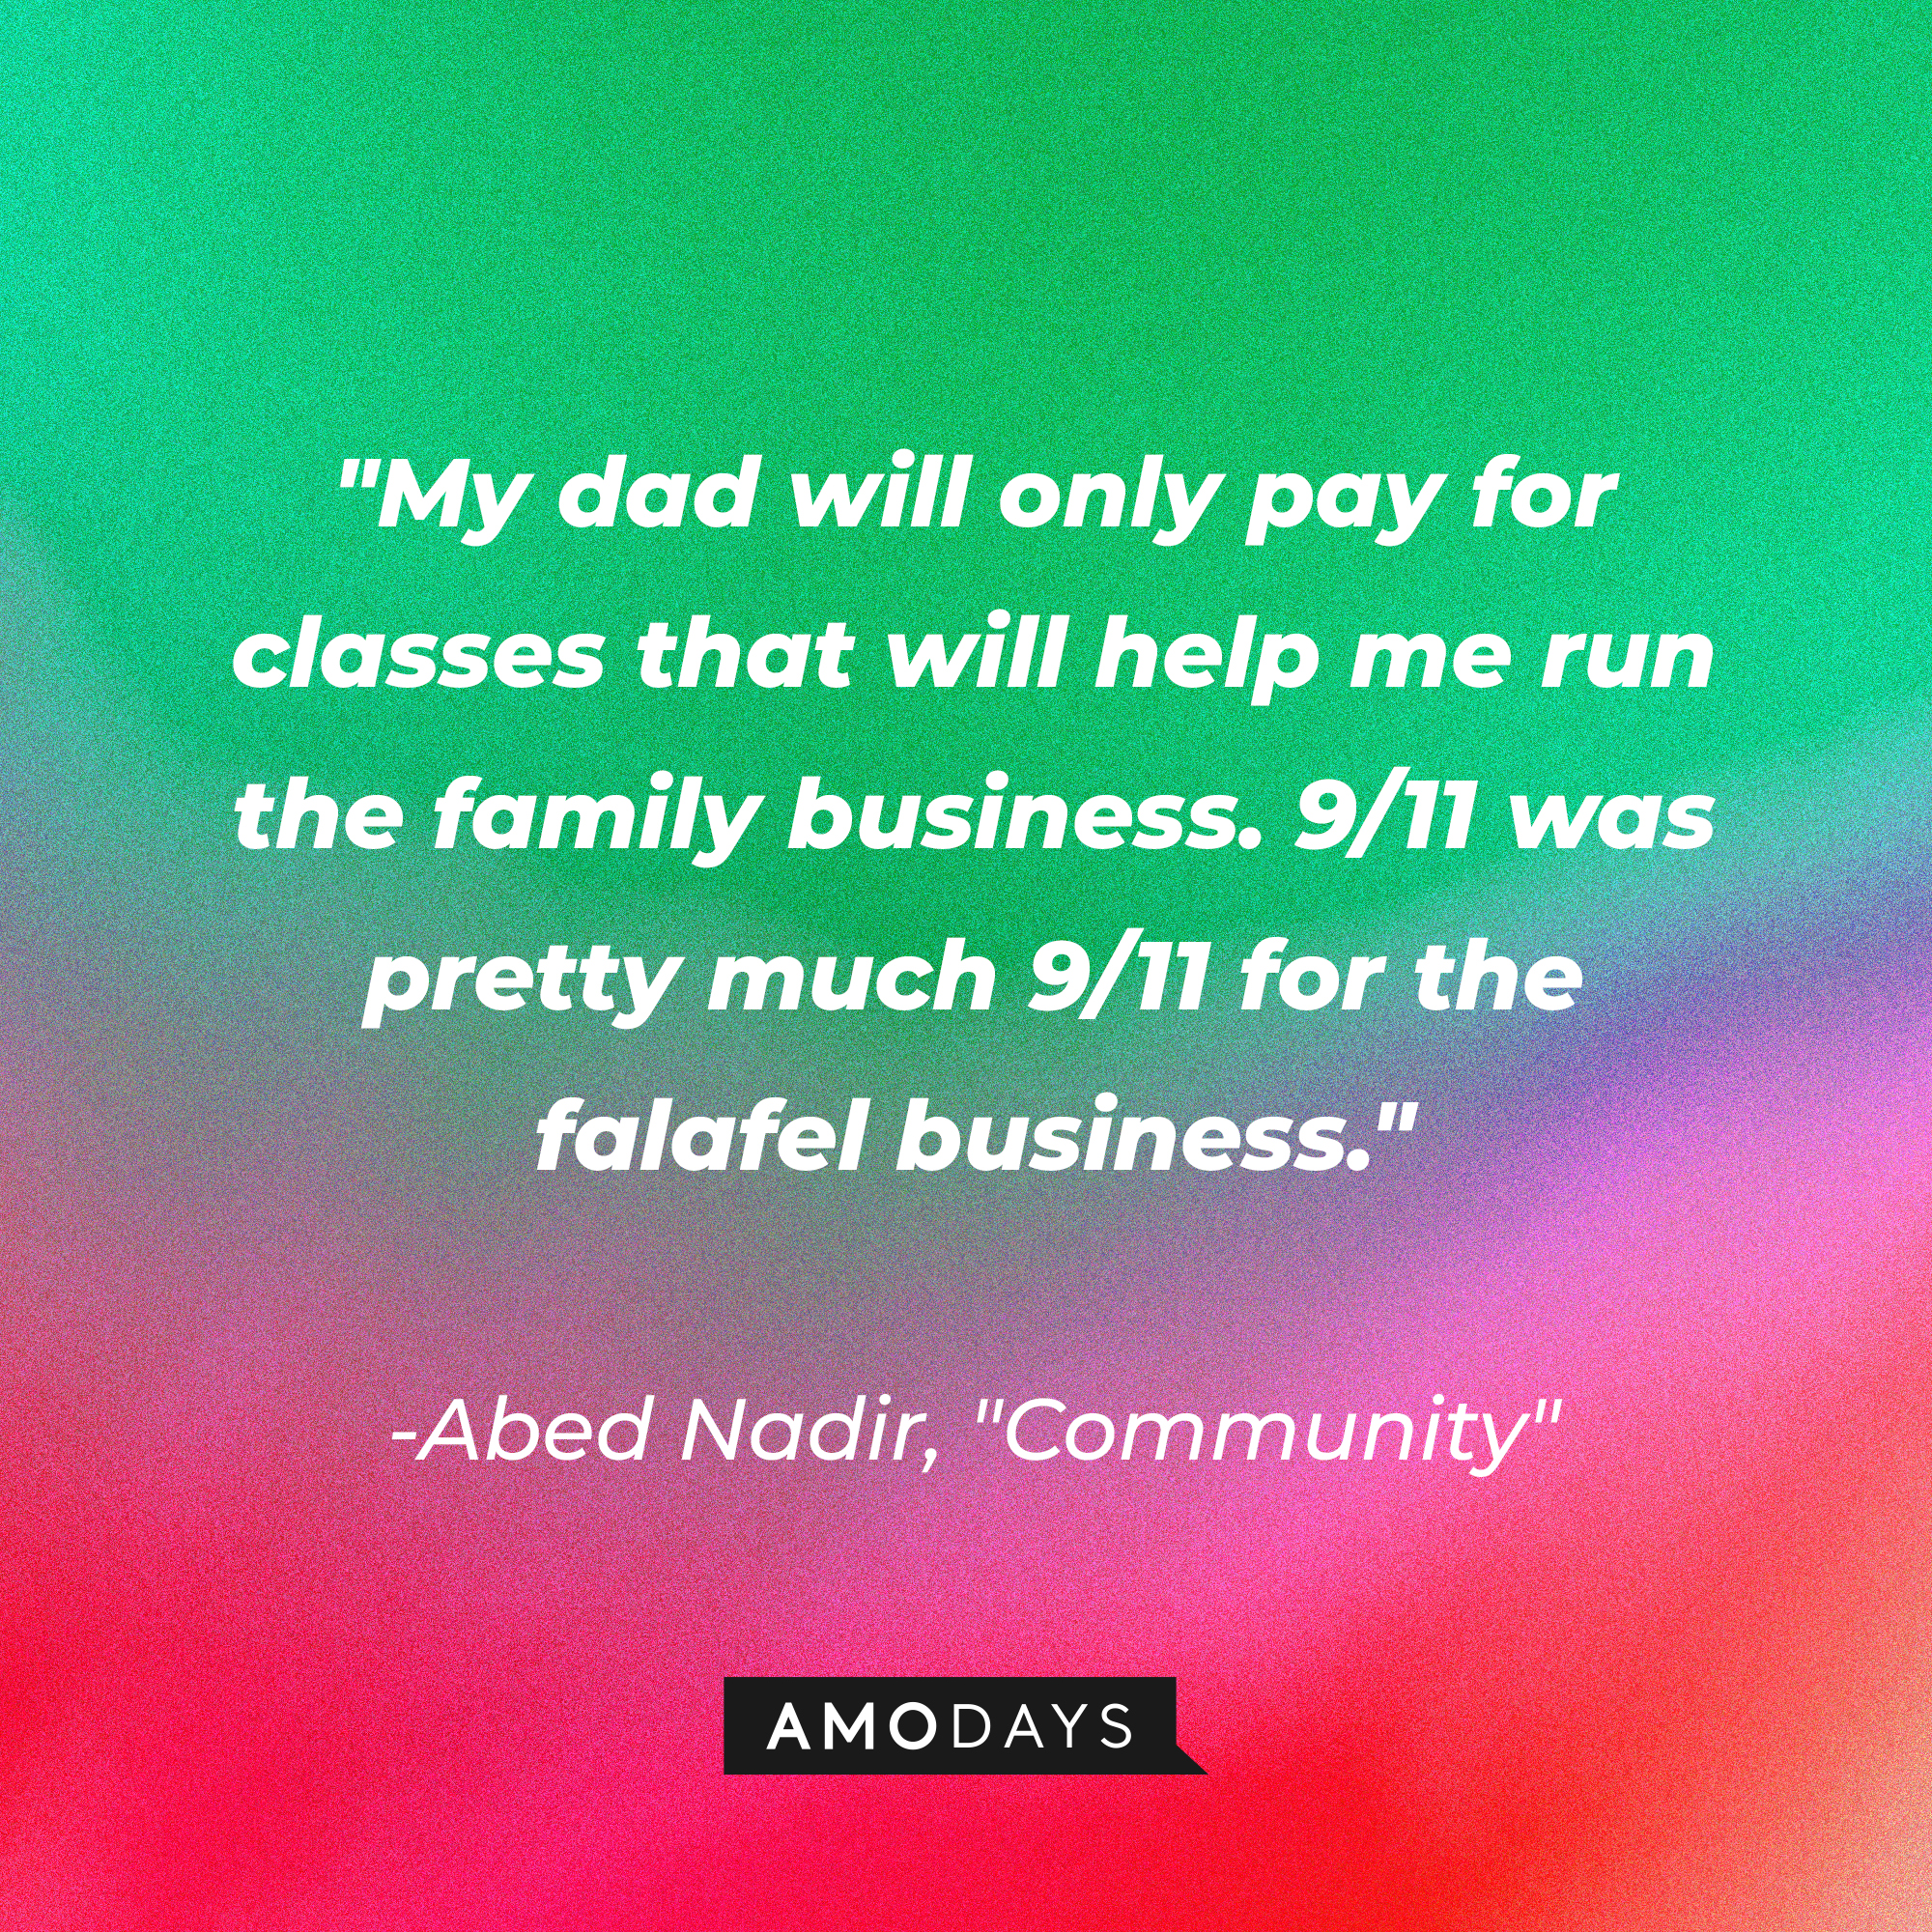 Abed Nadir's quote: "My dad will only pay for classes that will help me run the family business. 9/11 was pretty much 9/11 for the falafel business." | Source: Amodays